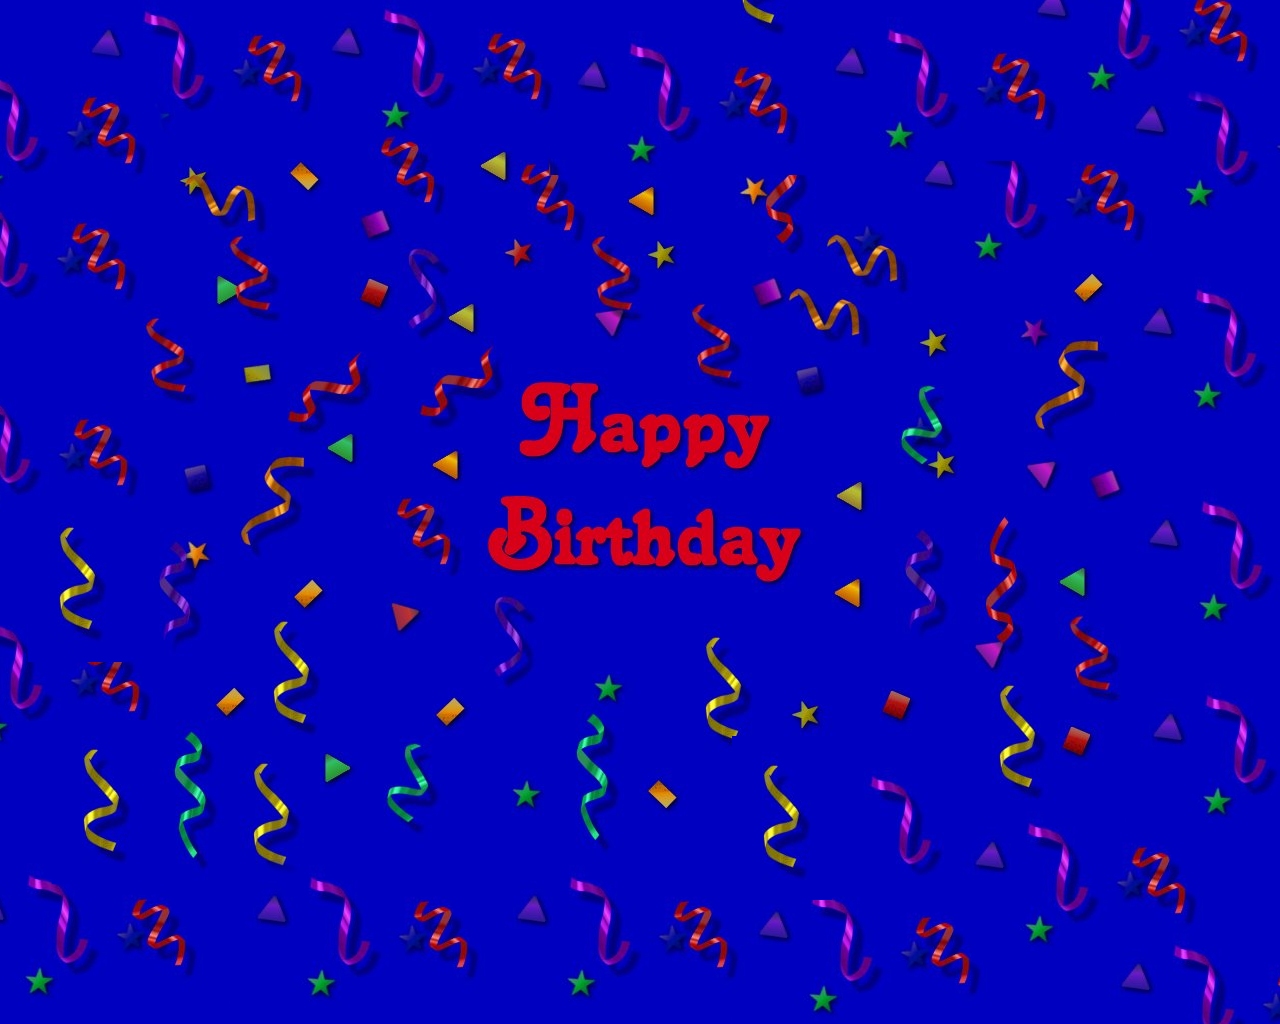 Birthday Wallpaper With Confetti and Streamers